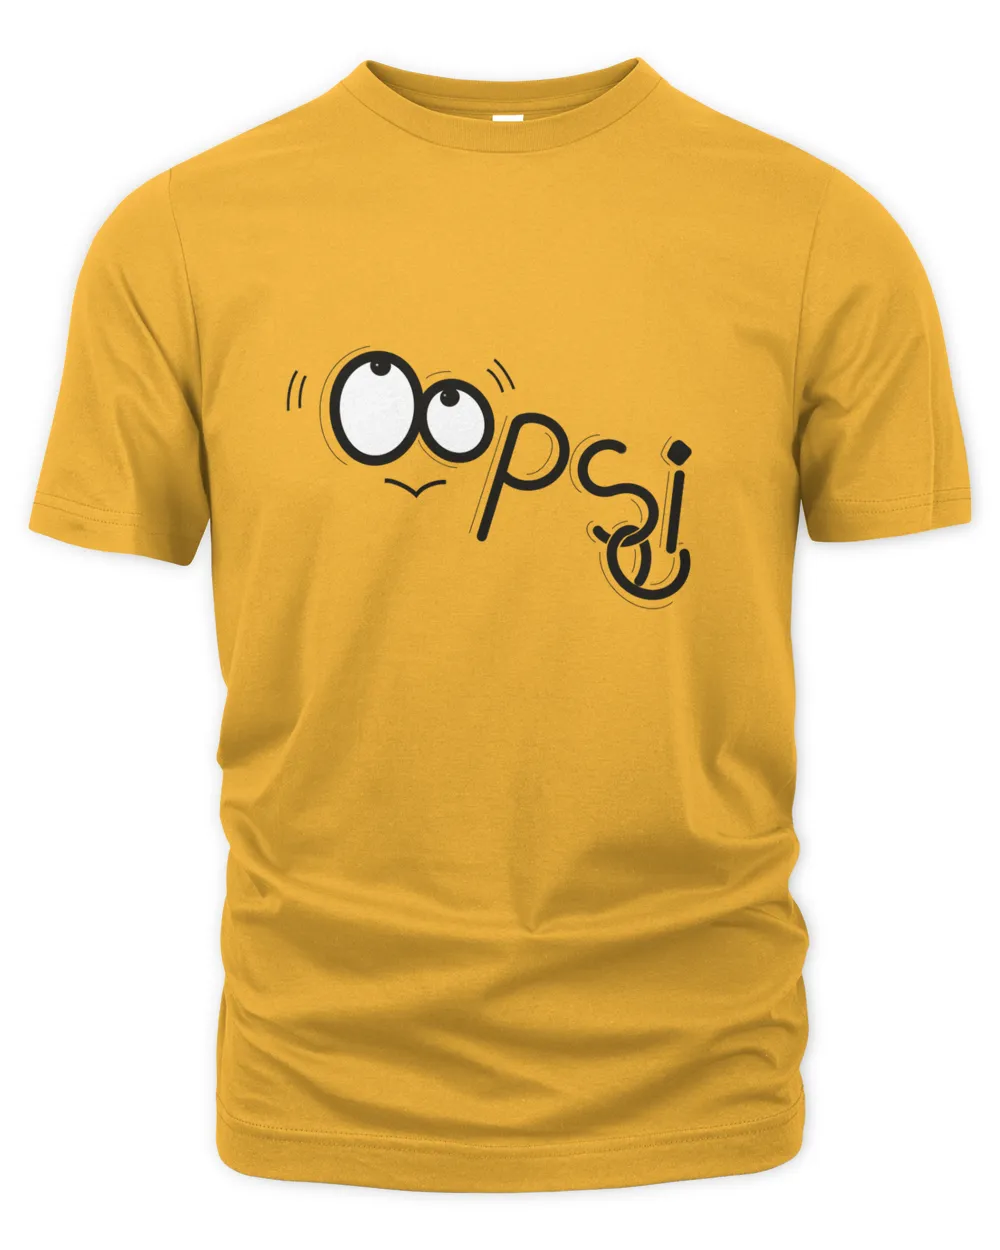 OOPSIE - Hilarious and Funny Apparel Collection